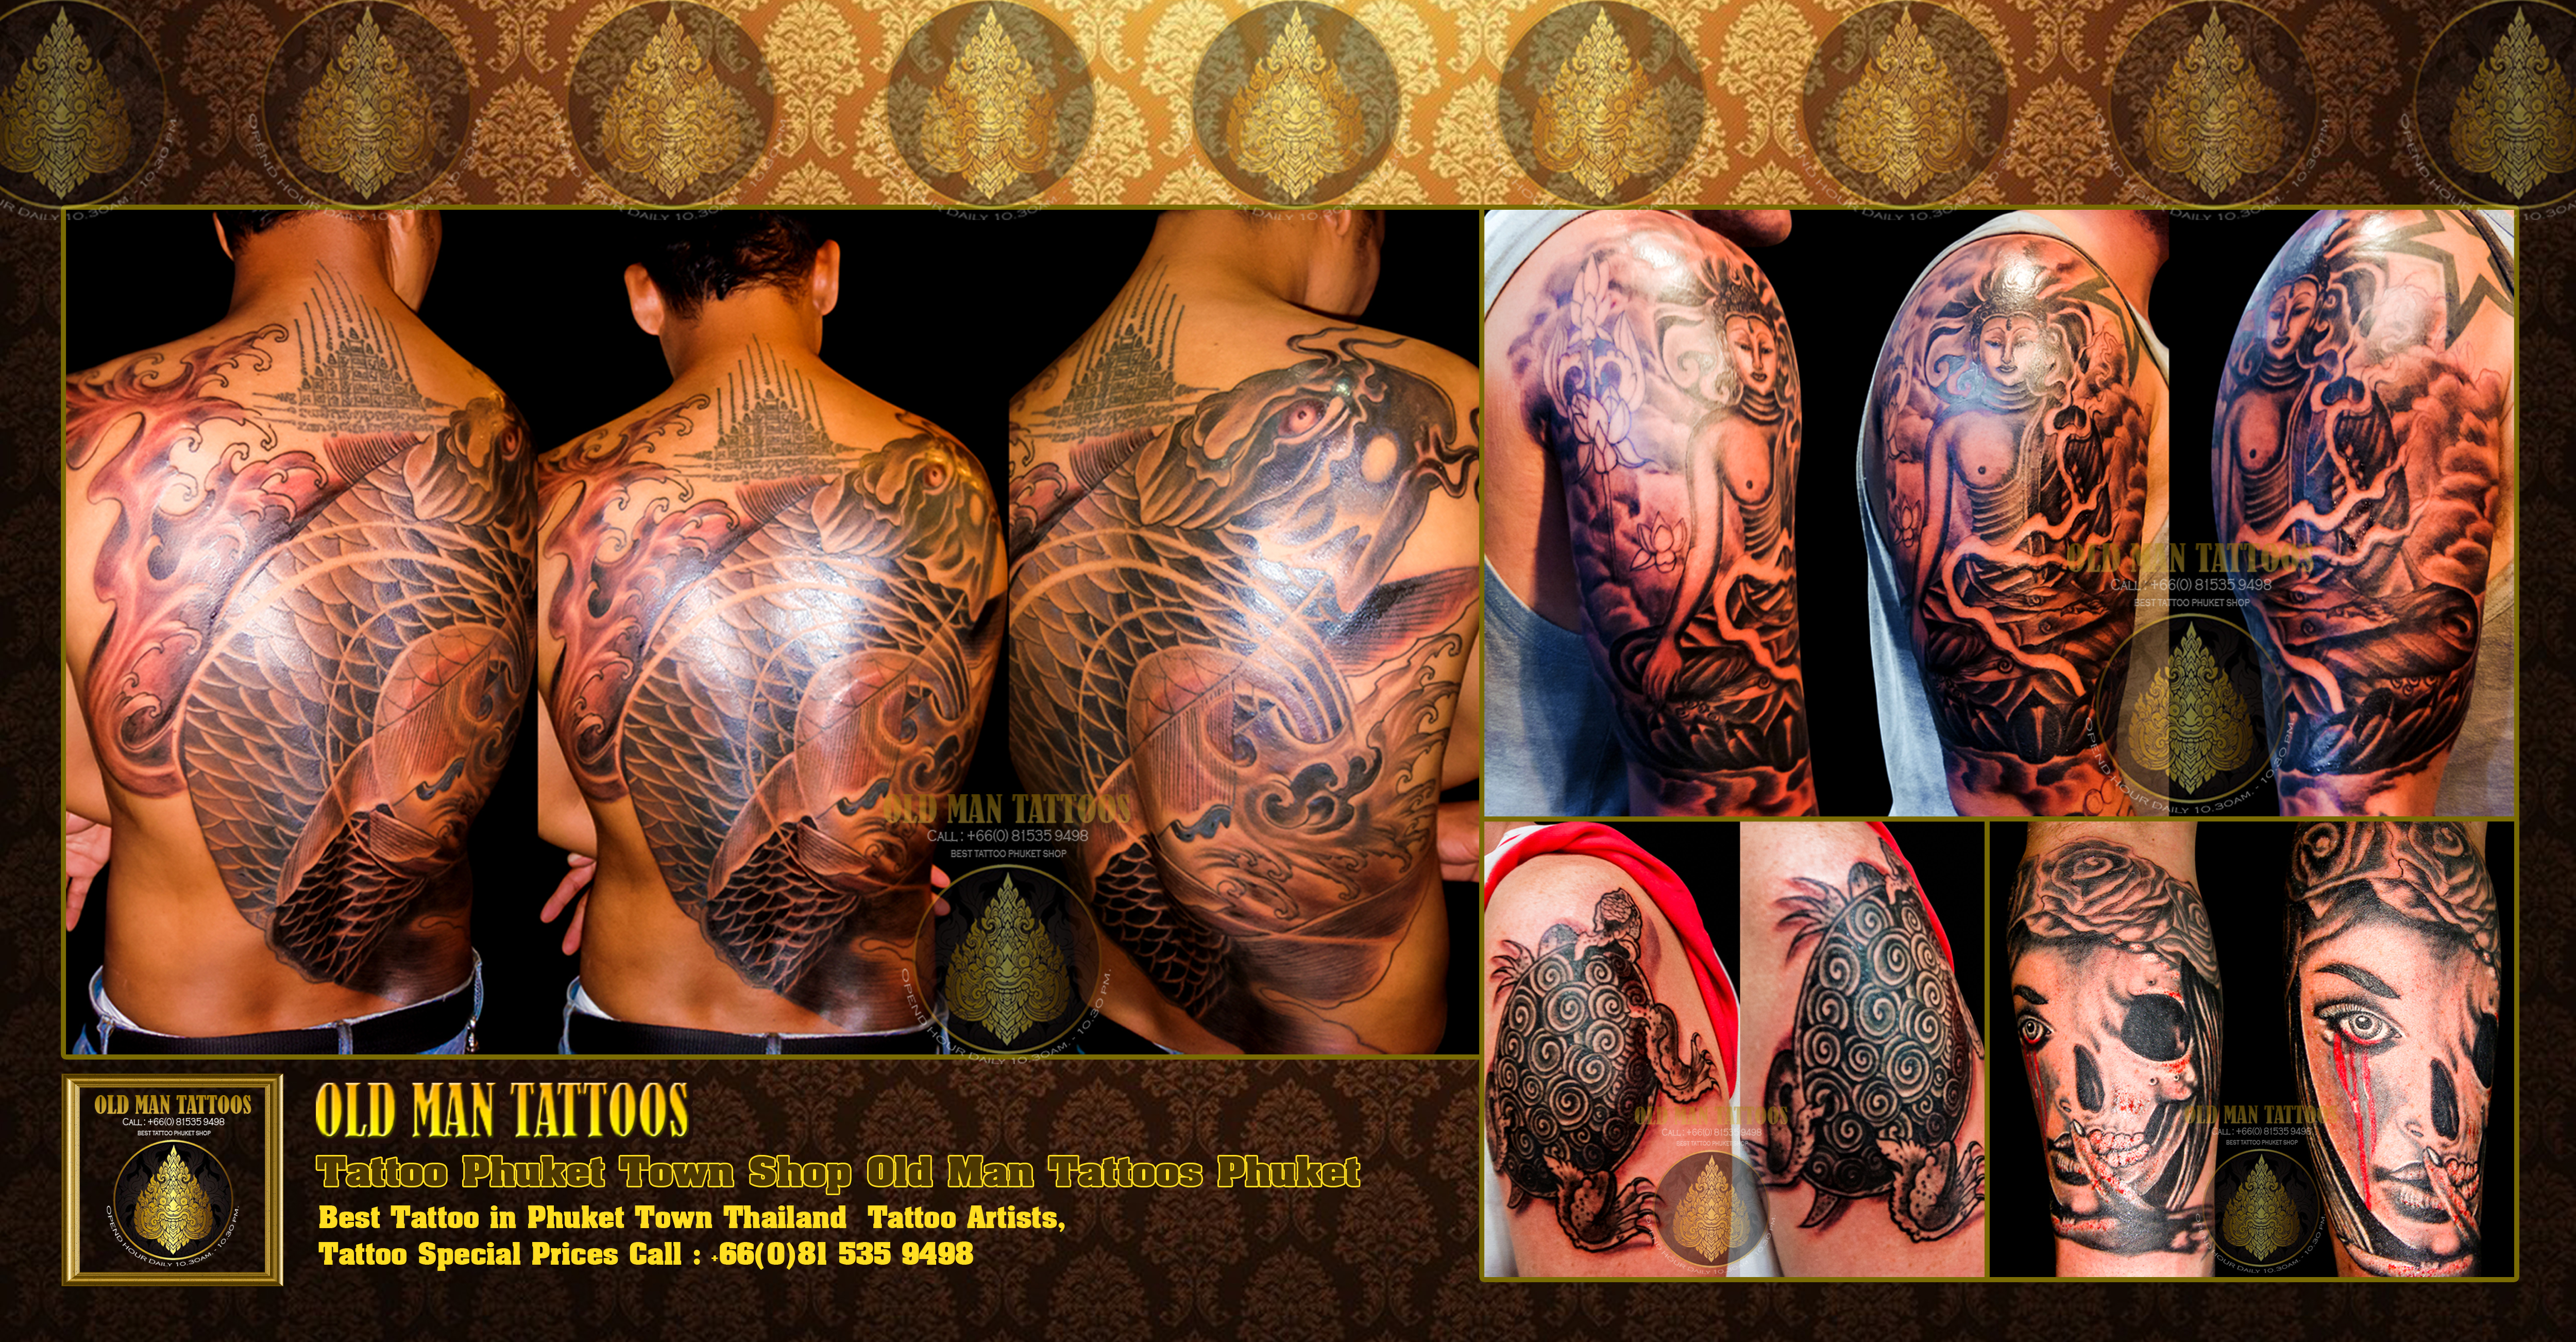 Recommended Tattoo Artists Phuket Town Thailand Best Tattoo Artists Phuket Shop  Studio Tattoo Thailand Old Man Tattoos Phuket Thailand